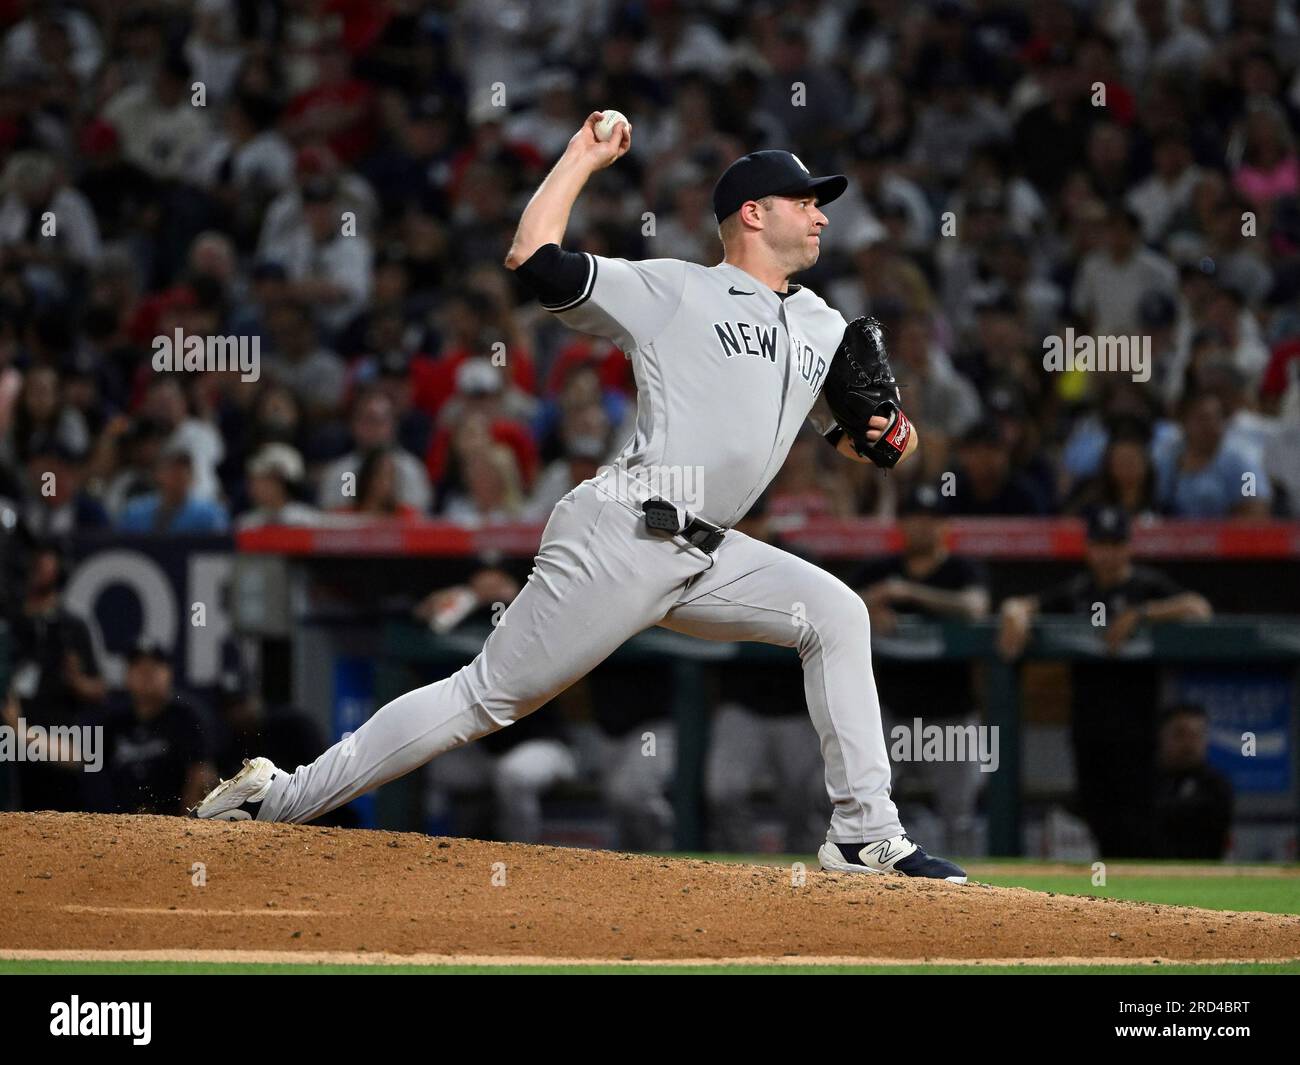 ANAHEIM, CA - JULY 17: New York Yankees pitcher Michael King (34) pitching  during an MLB baseball game against the Los Angeles Angels played on July  17, 2023 at Angel Stadium in